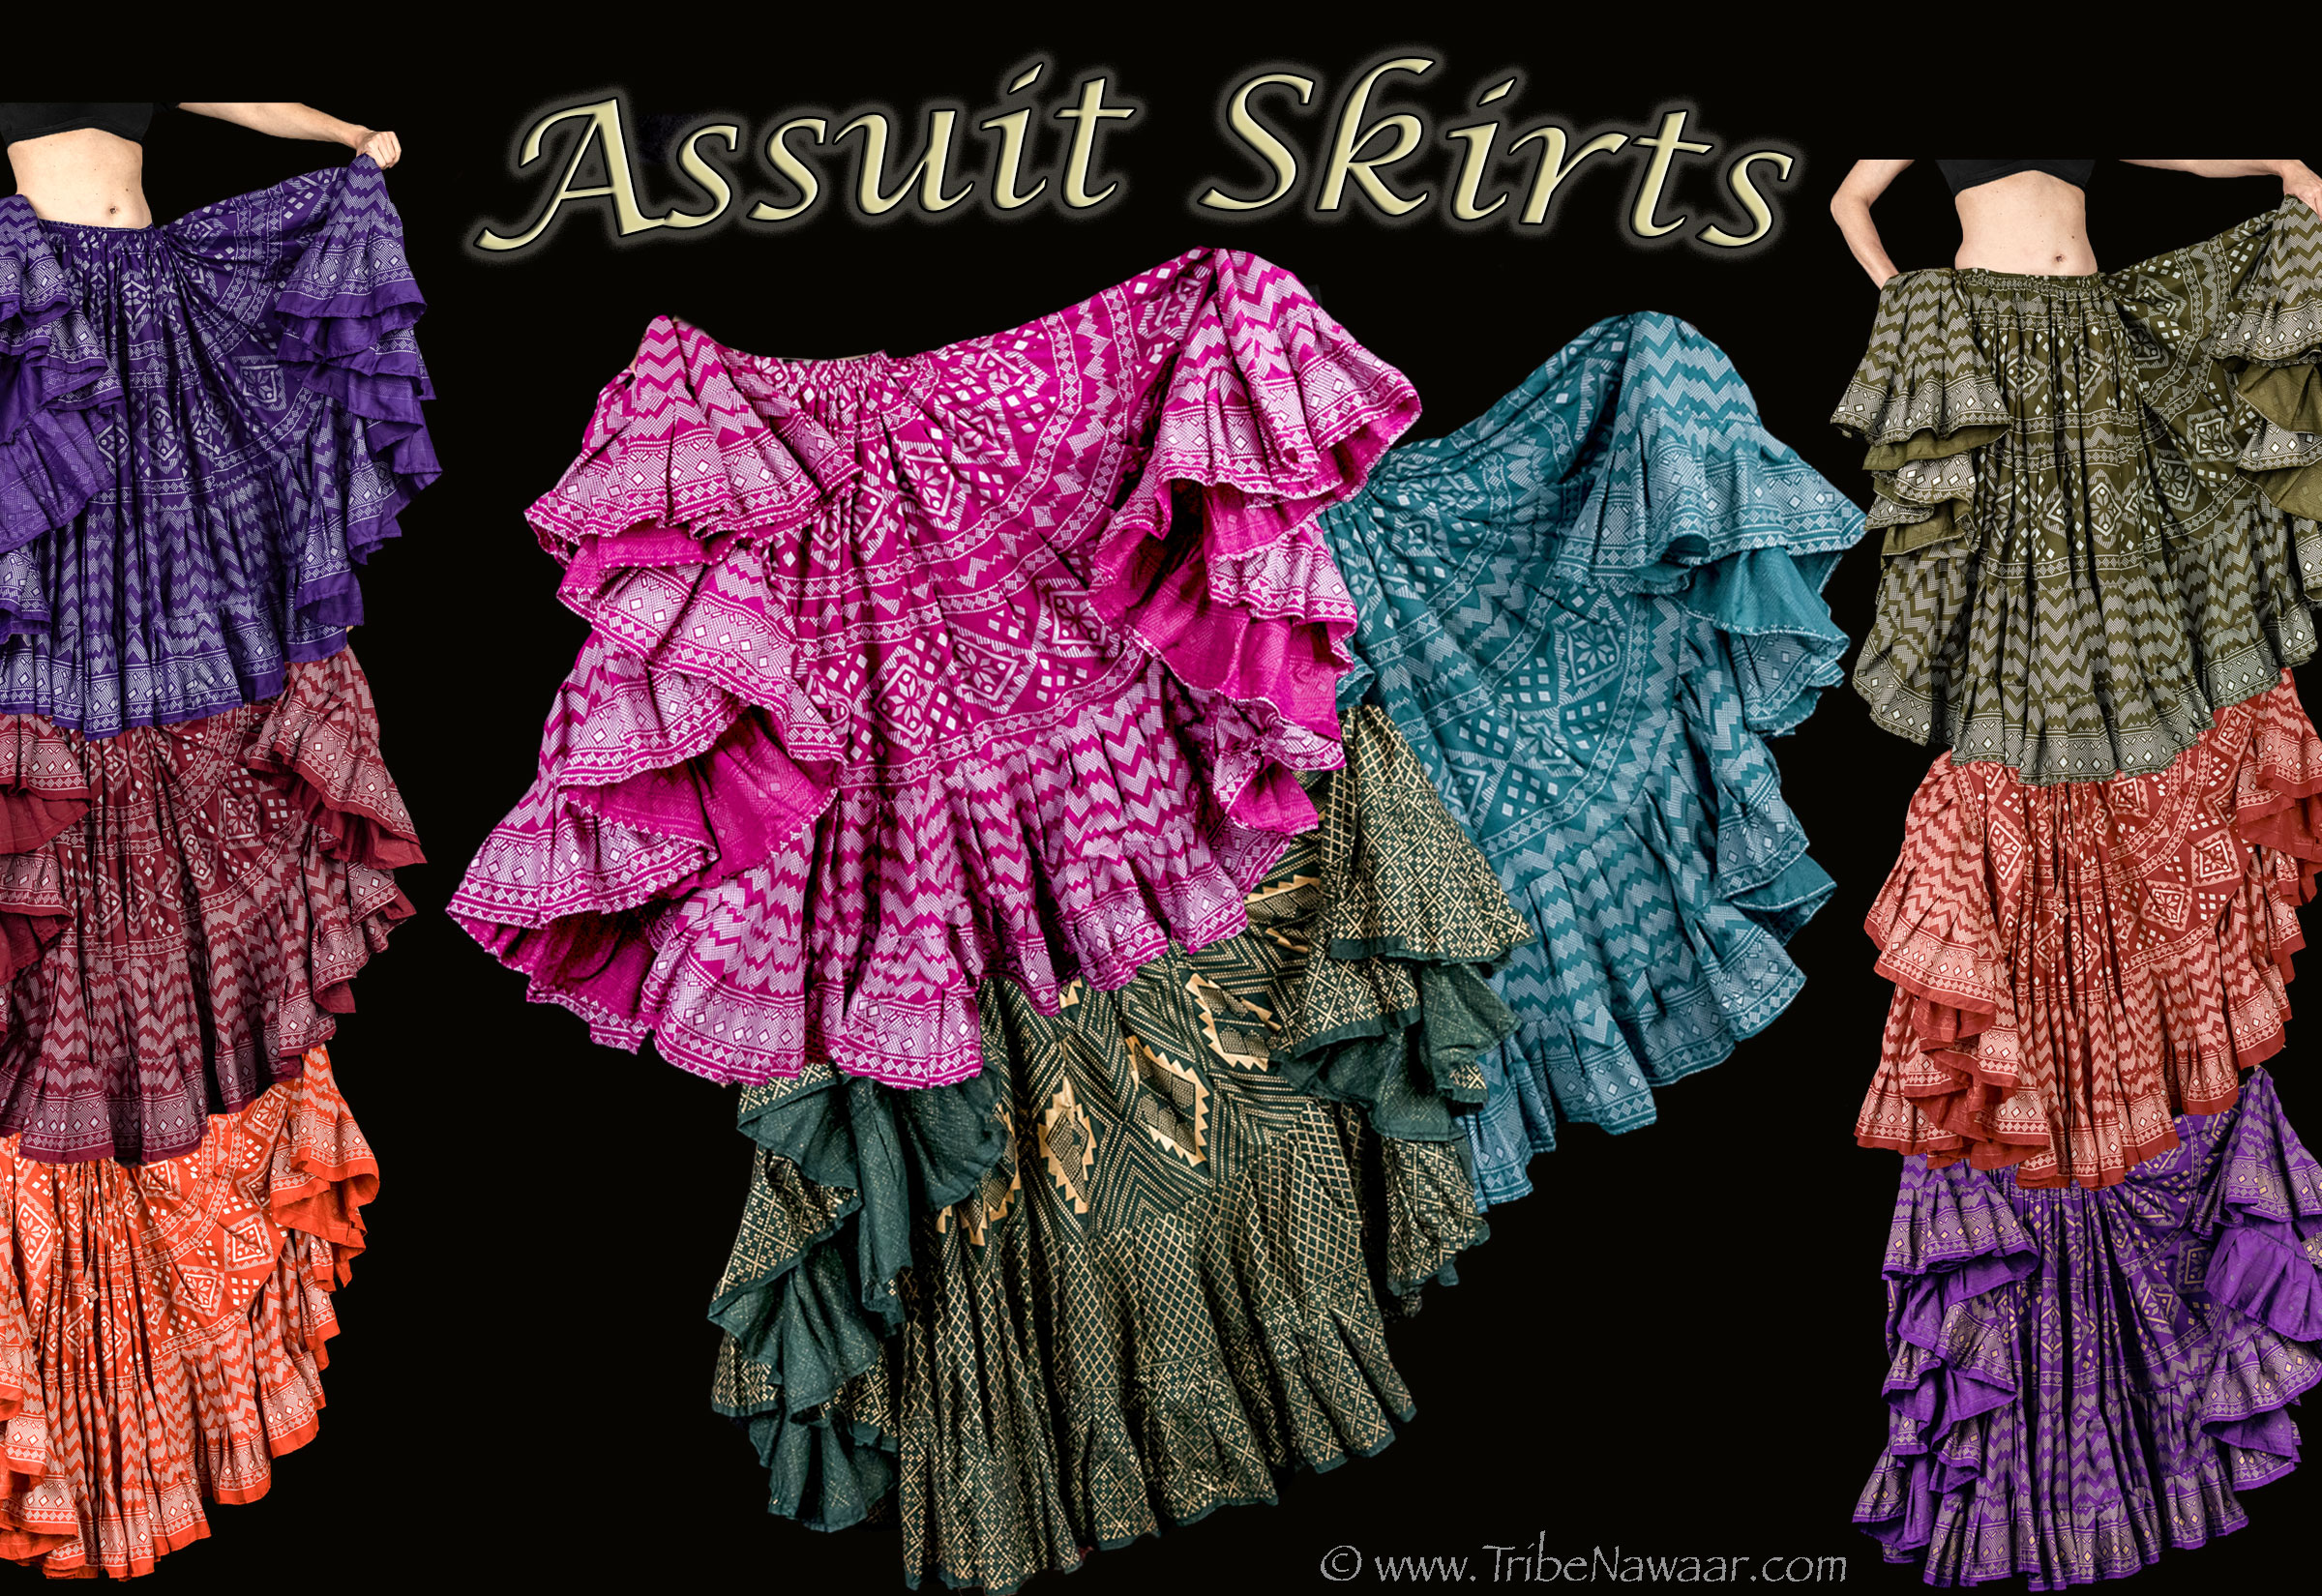 25 yard and 35 yard Assuit skirts for belly dance. Great for ATS, FCBDStyle, folkloric, steampunk, renaissance & medieval faires. 11 colors now available at The Nawaar Marketplace at www.TribeNawaar.com